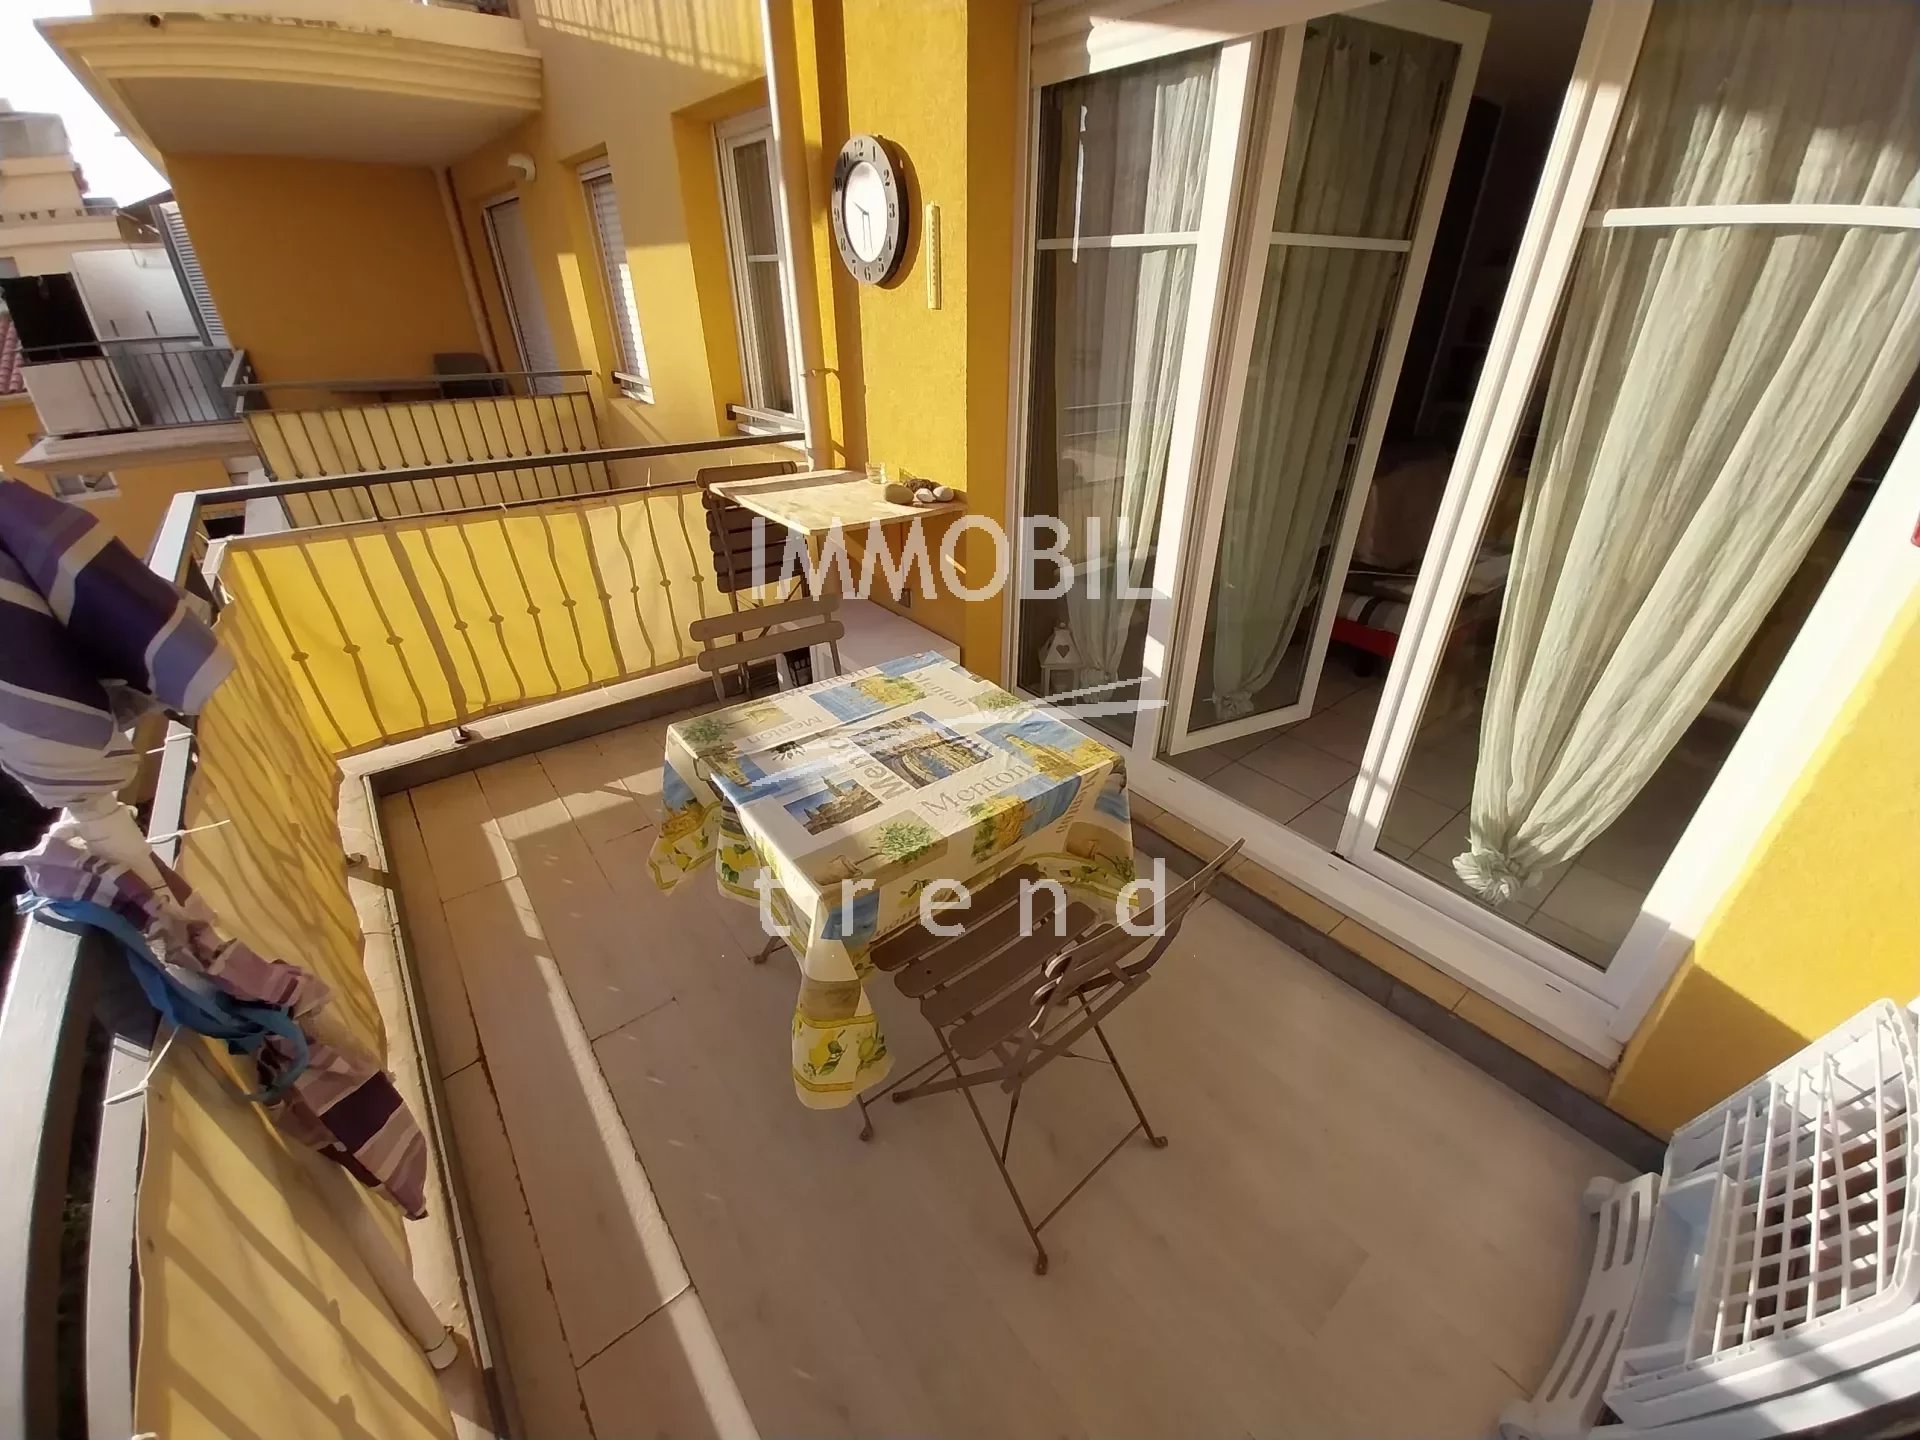 MENTON TOWN CENTRE - Lovely one bedroom apartment with terrace  in a recent building